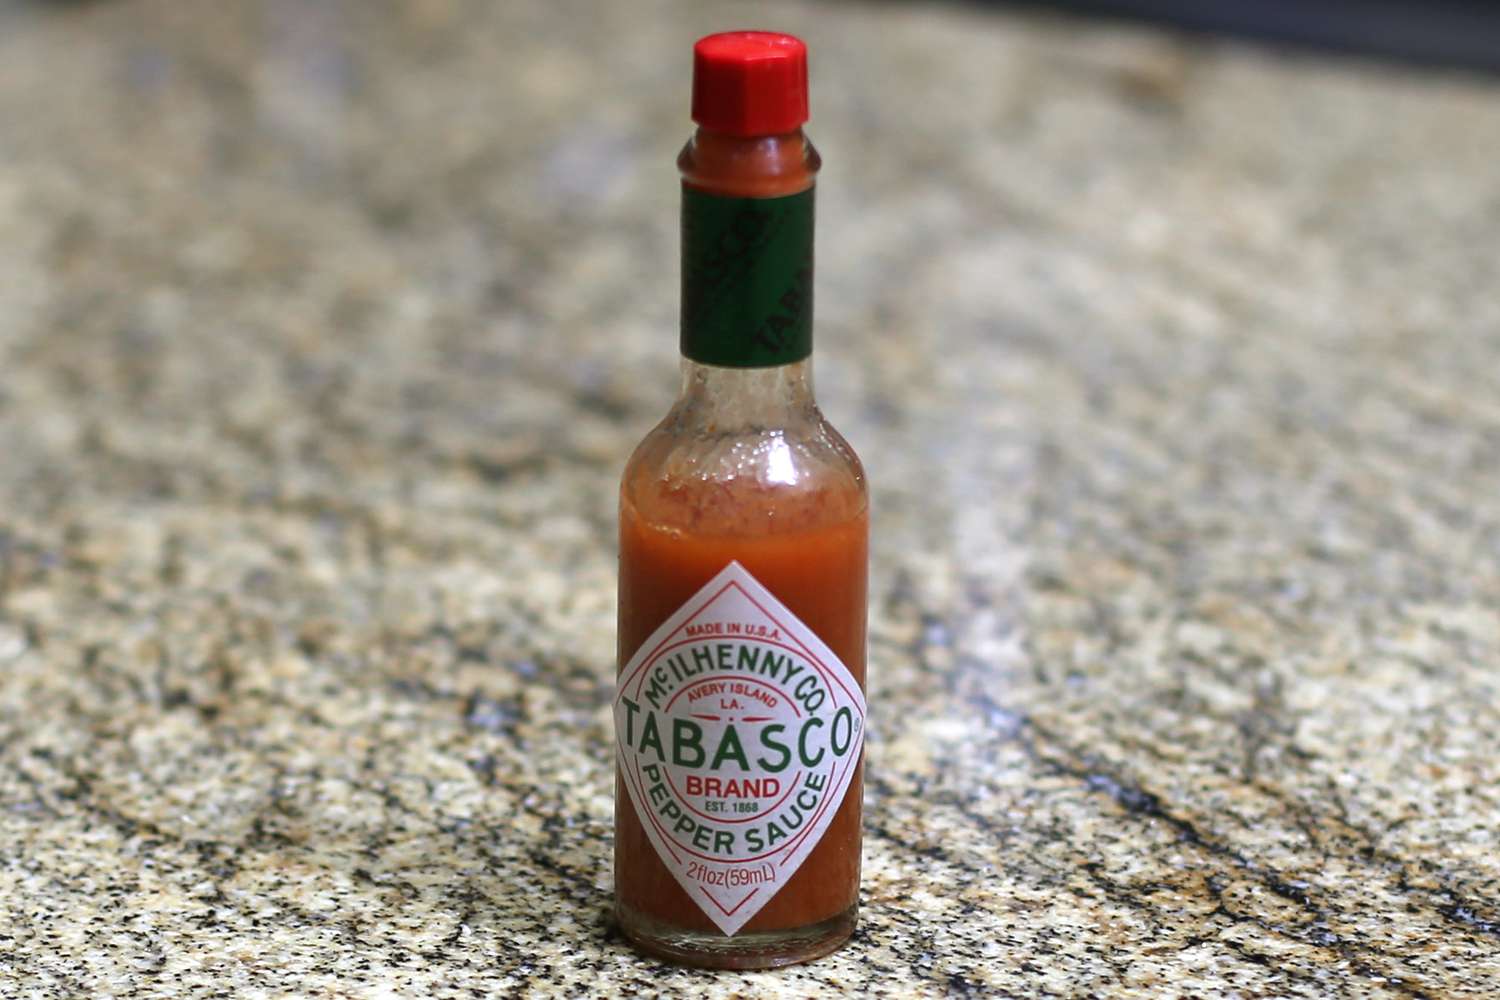 How To Store Tabasco Sauce After Opening